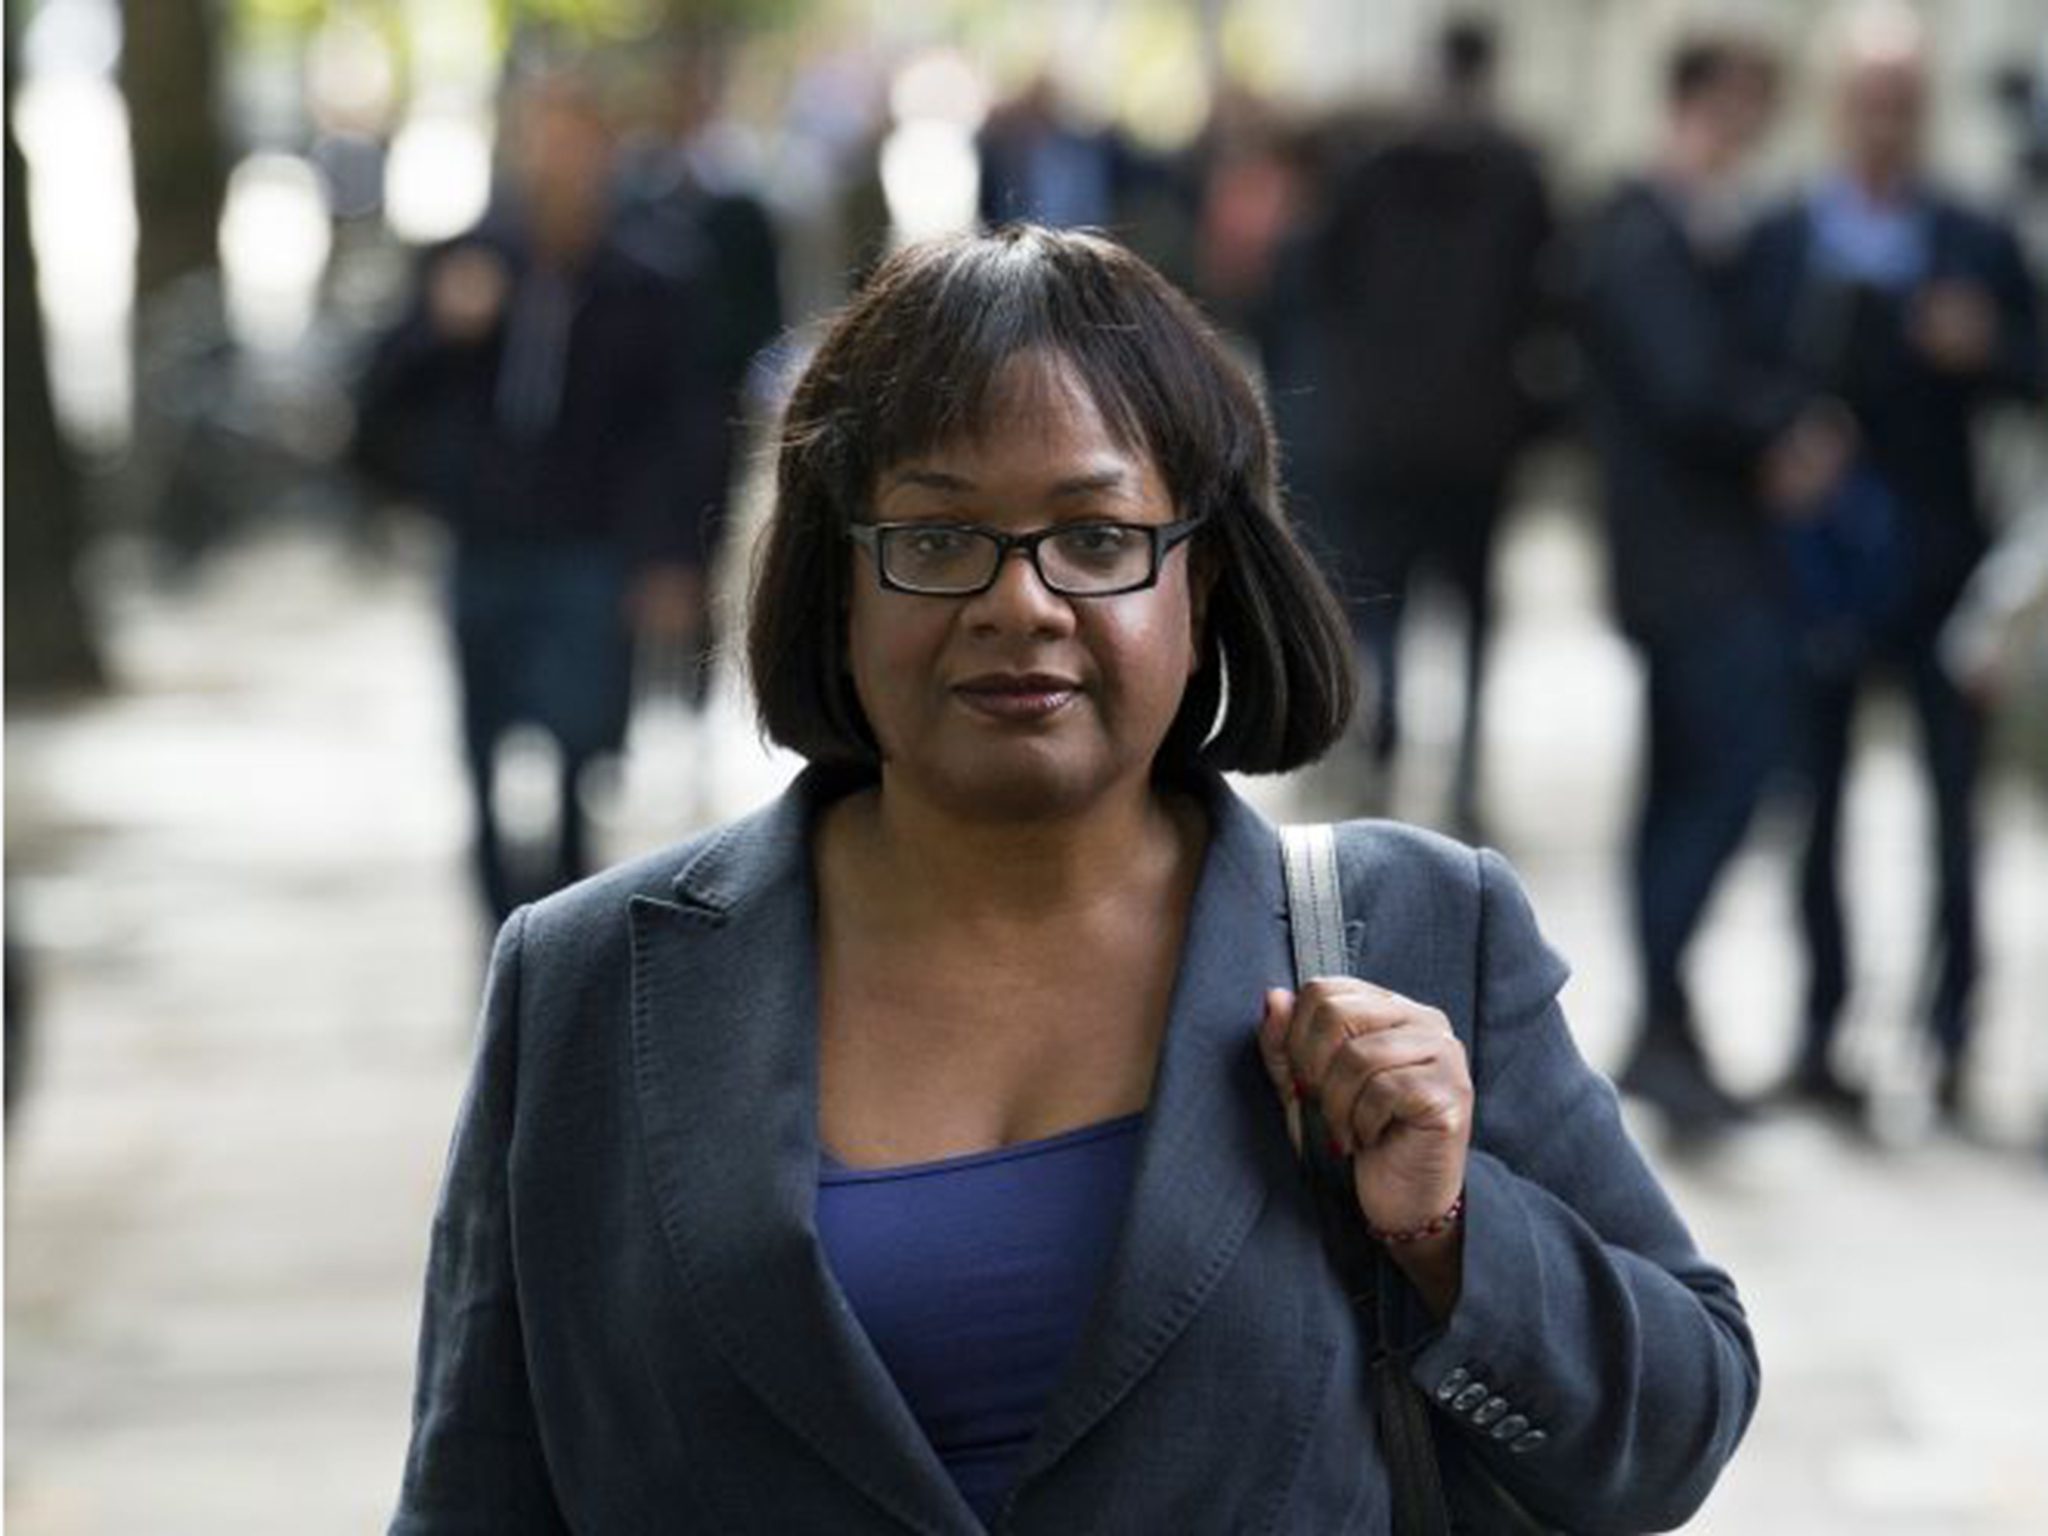 Thumbnail for Snooper's Charter is 'unlawful' and must be overhauled, Labour's Dianne Abbott says